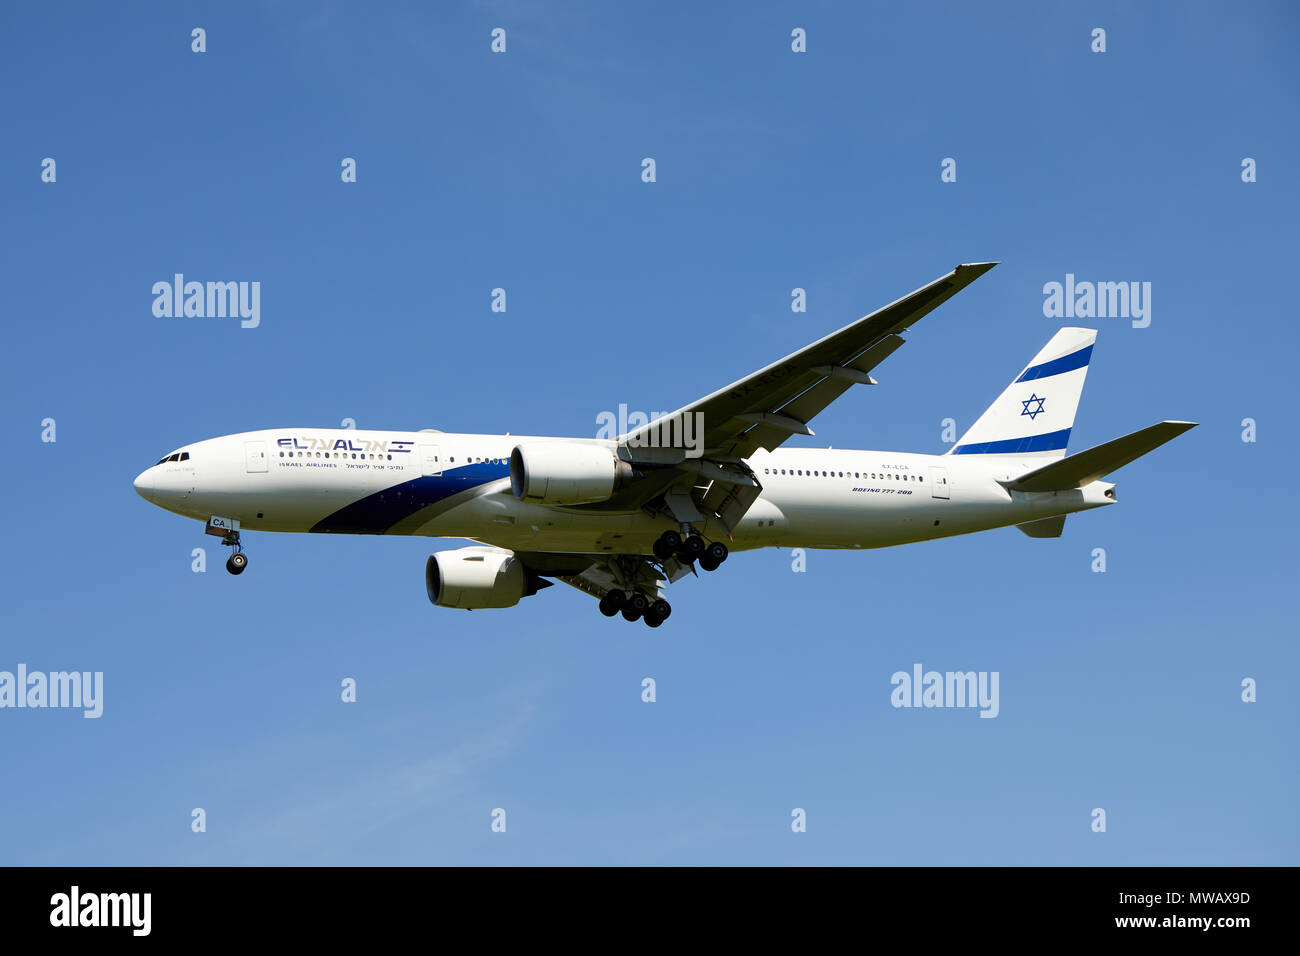 An El-Al Israel Airlines Boeing 777-200 aircraft, registration number 4X-ECA, as it approaches a landing. Stock Photo